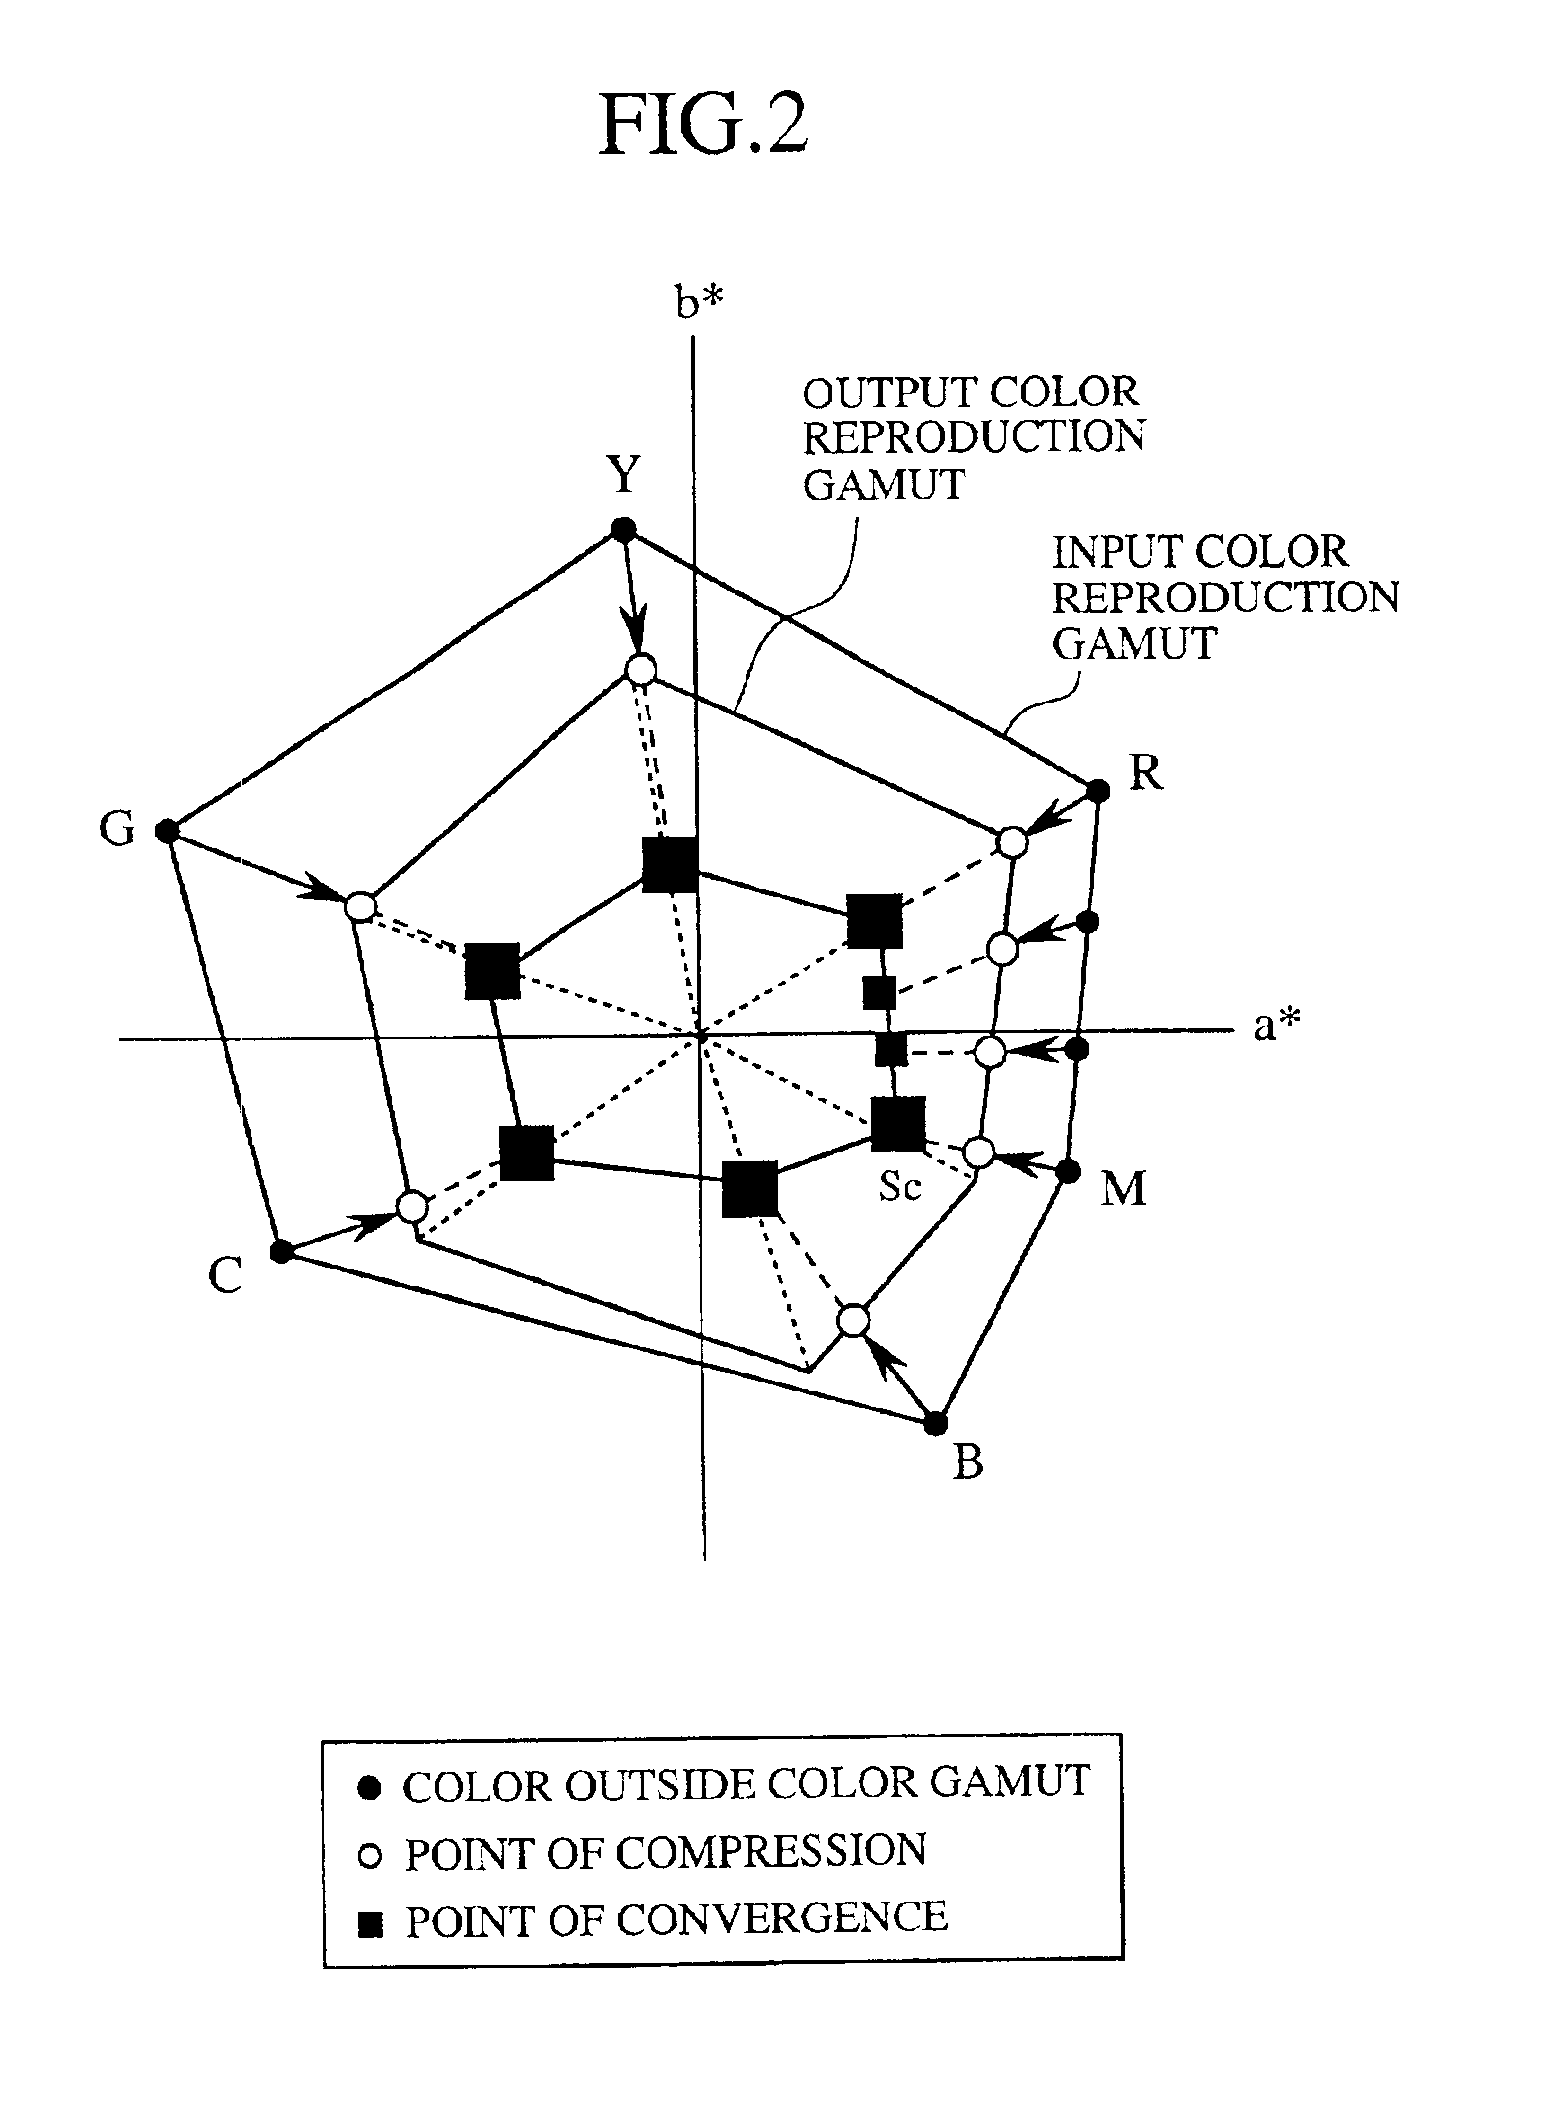 Color gamut compression apparatus and method